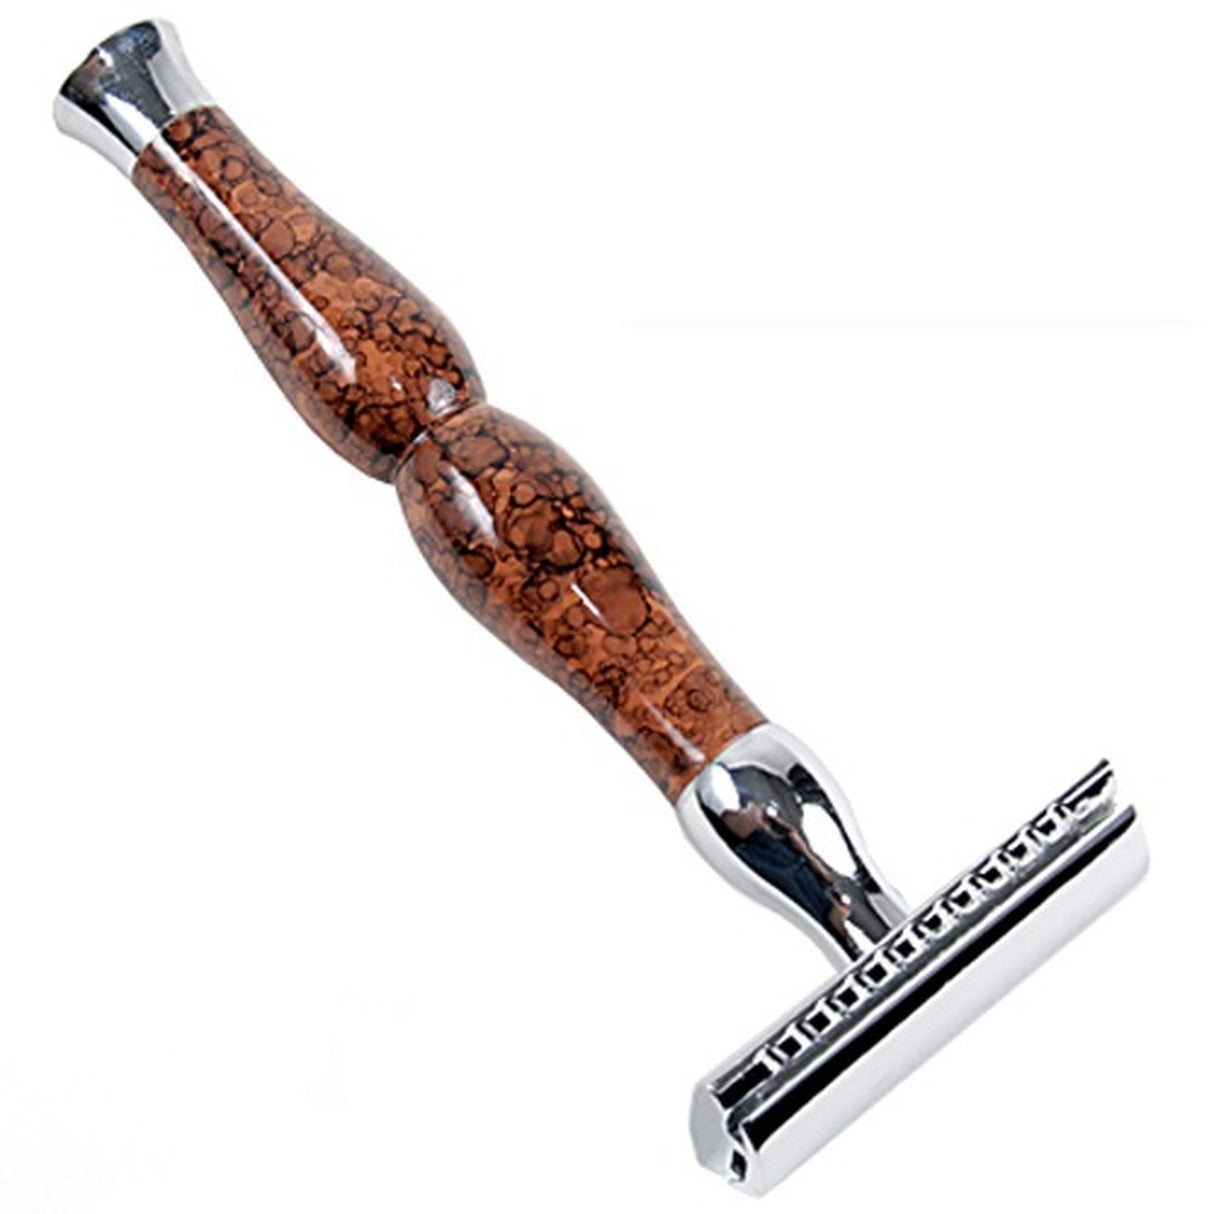 The Parker 45R is a striking three-piece safety razor. It is unique in every facet. We often call it our "Art-Deco" razor. However, don't let its good looks fool you - it is a great shaver. With extra heft this razor shaves through the toughest stubble with ease.